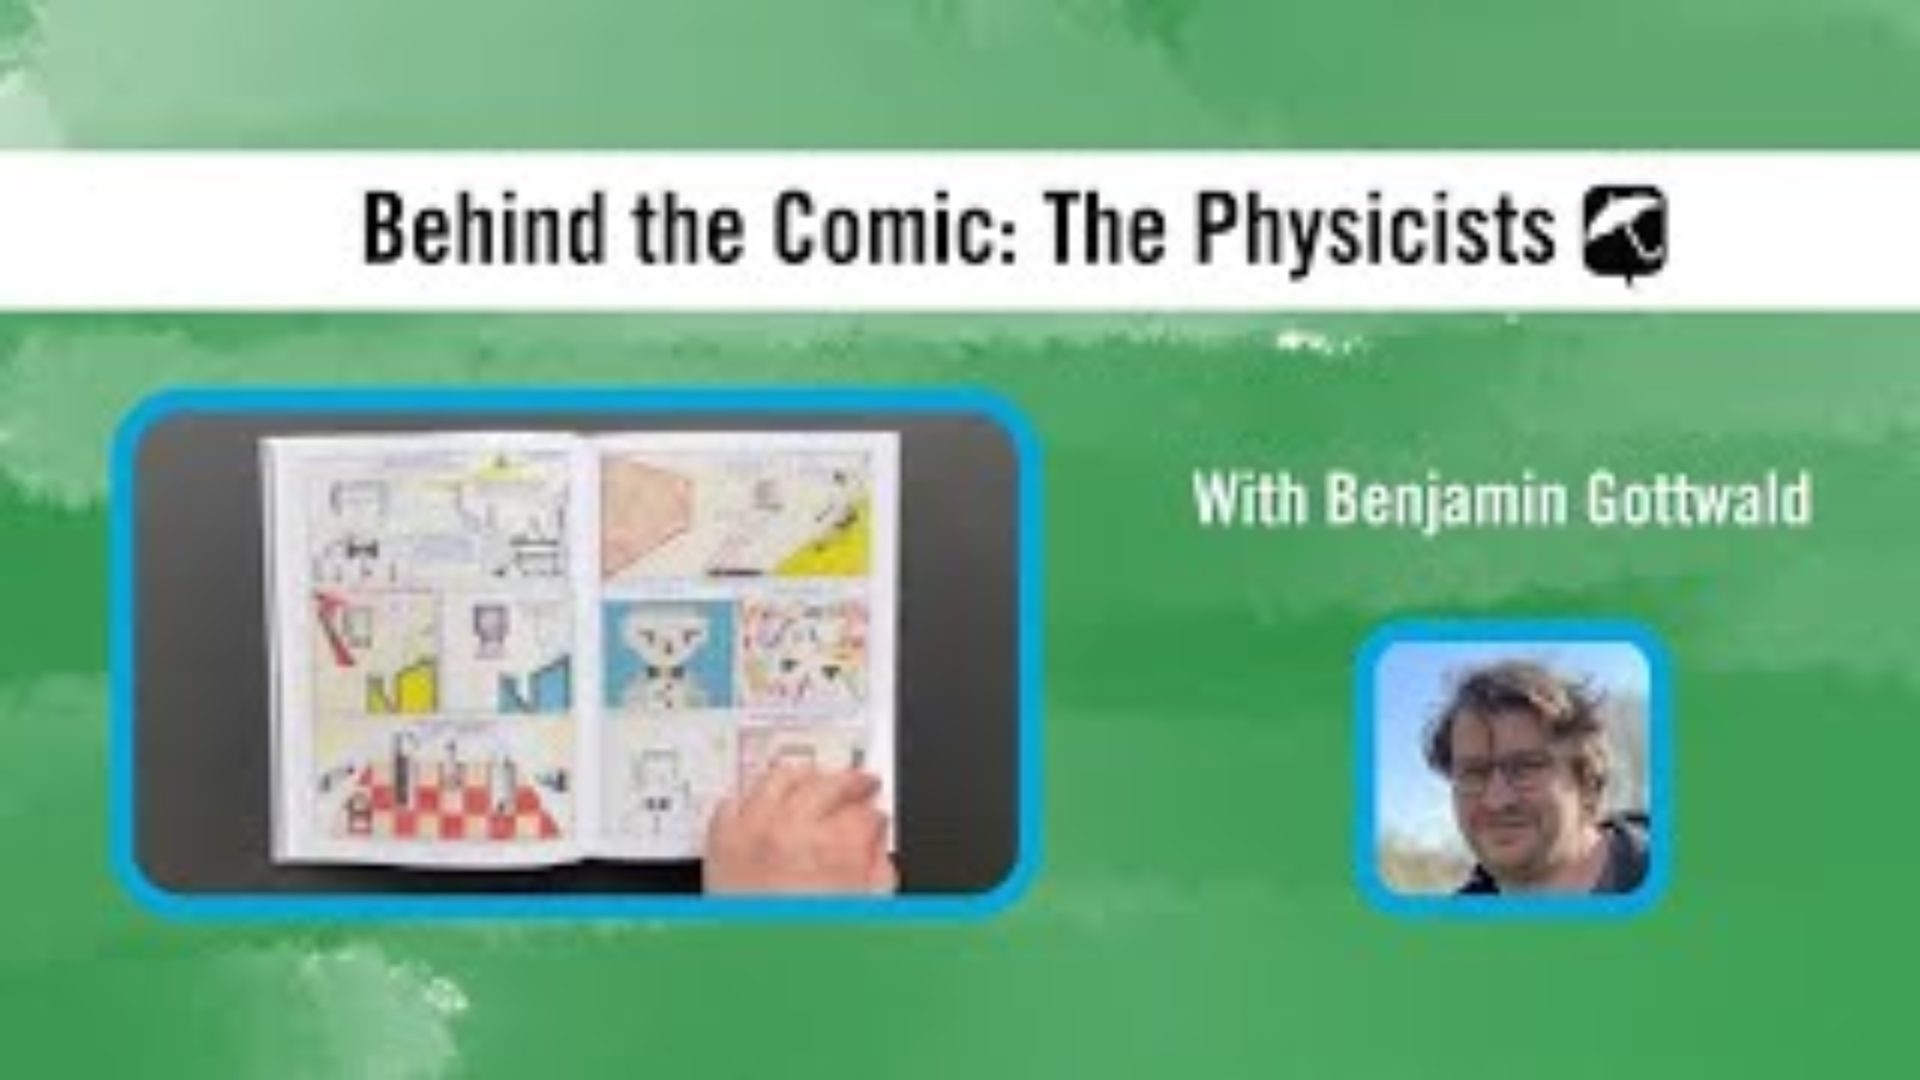 Benjamin Gottwald on “The Physicists”